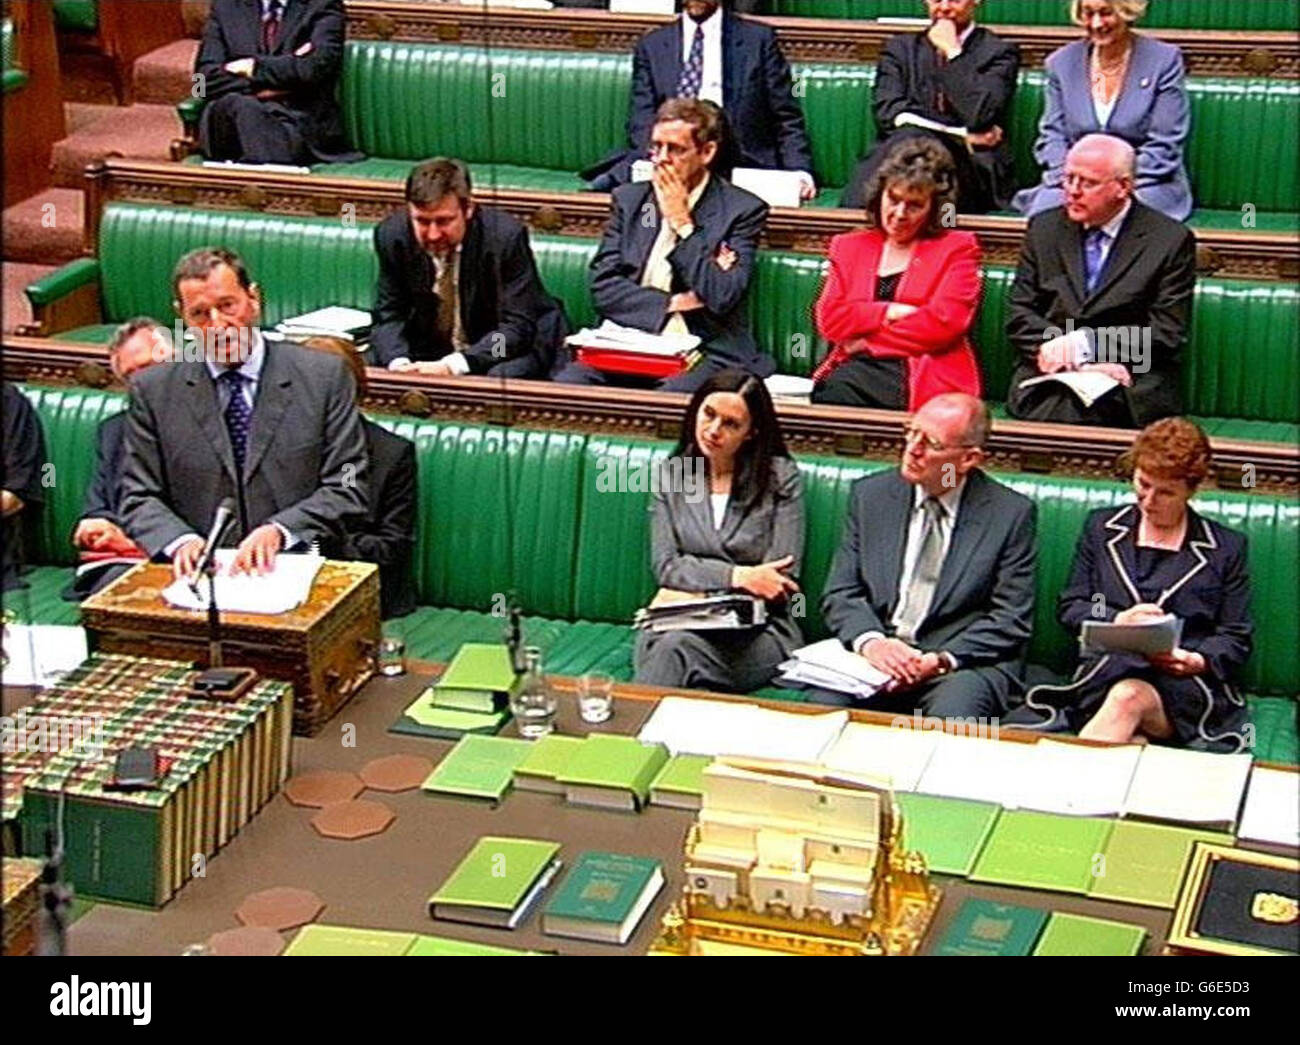 Screen grab of Home Secretary David Blunkett speaking to the House of Commons, London regarding the breach of security at Prince William's 21st birthday party at the weekend. * Mr Blunkett told the Commons that, on behalf of the Government and the House, he wanted to offer his deep regret to the Royal Family over Saturday's security breach at Windsor Castle Stock Photo